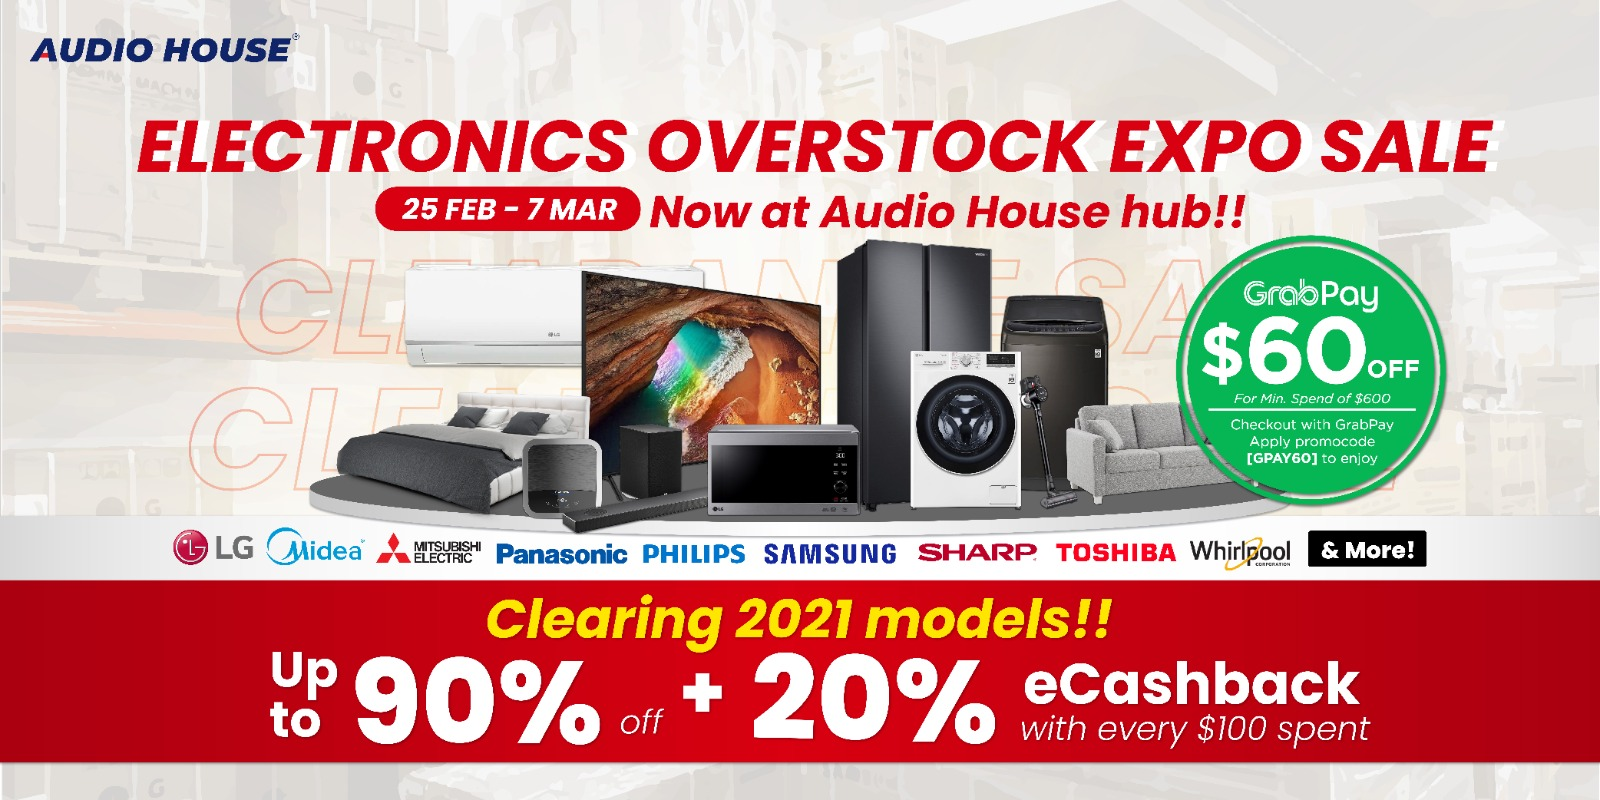 [Audio House Electronics Overstock Expo Sale] Clearing 2021 Models at Up to 90% OFF + $20 eCashback